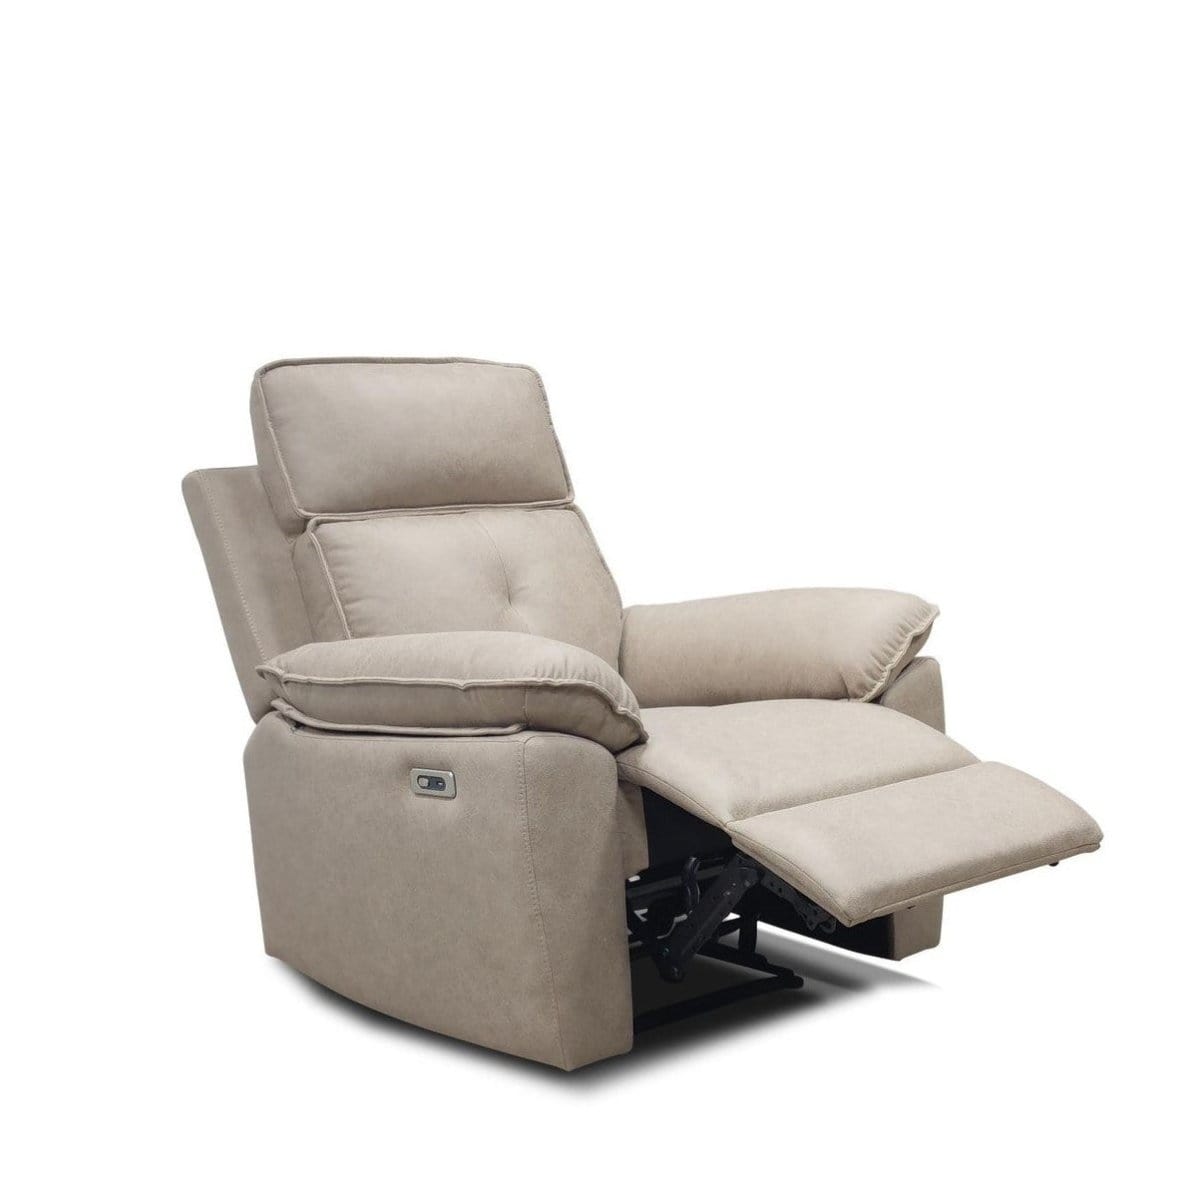 Americana Top Grain Full Leather Electric Recliner Sofa 1/2/3-Seater RC0750 (I) picket and rail